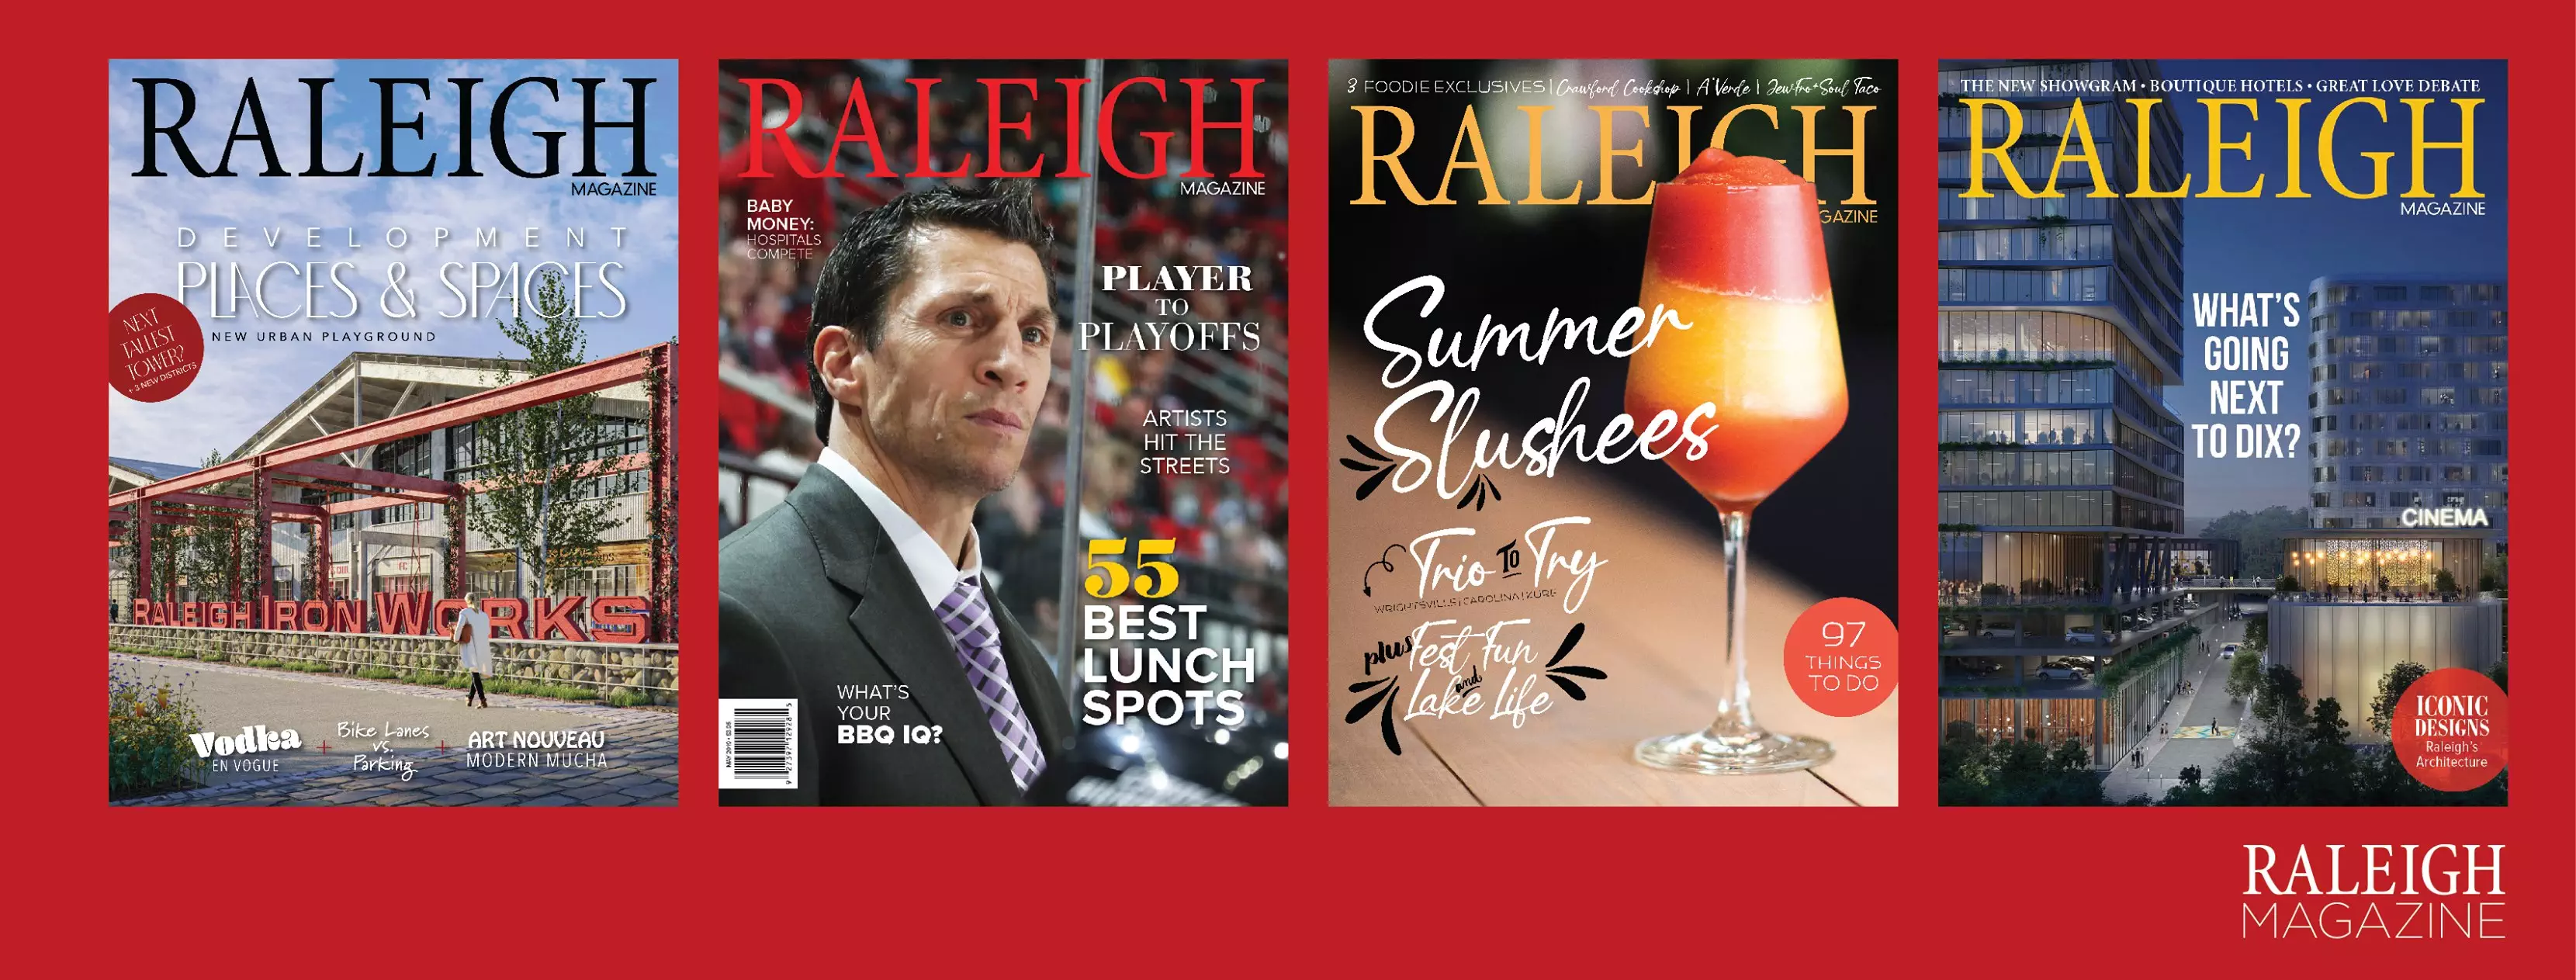 Raleigh Magazine Covers